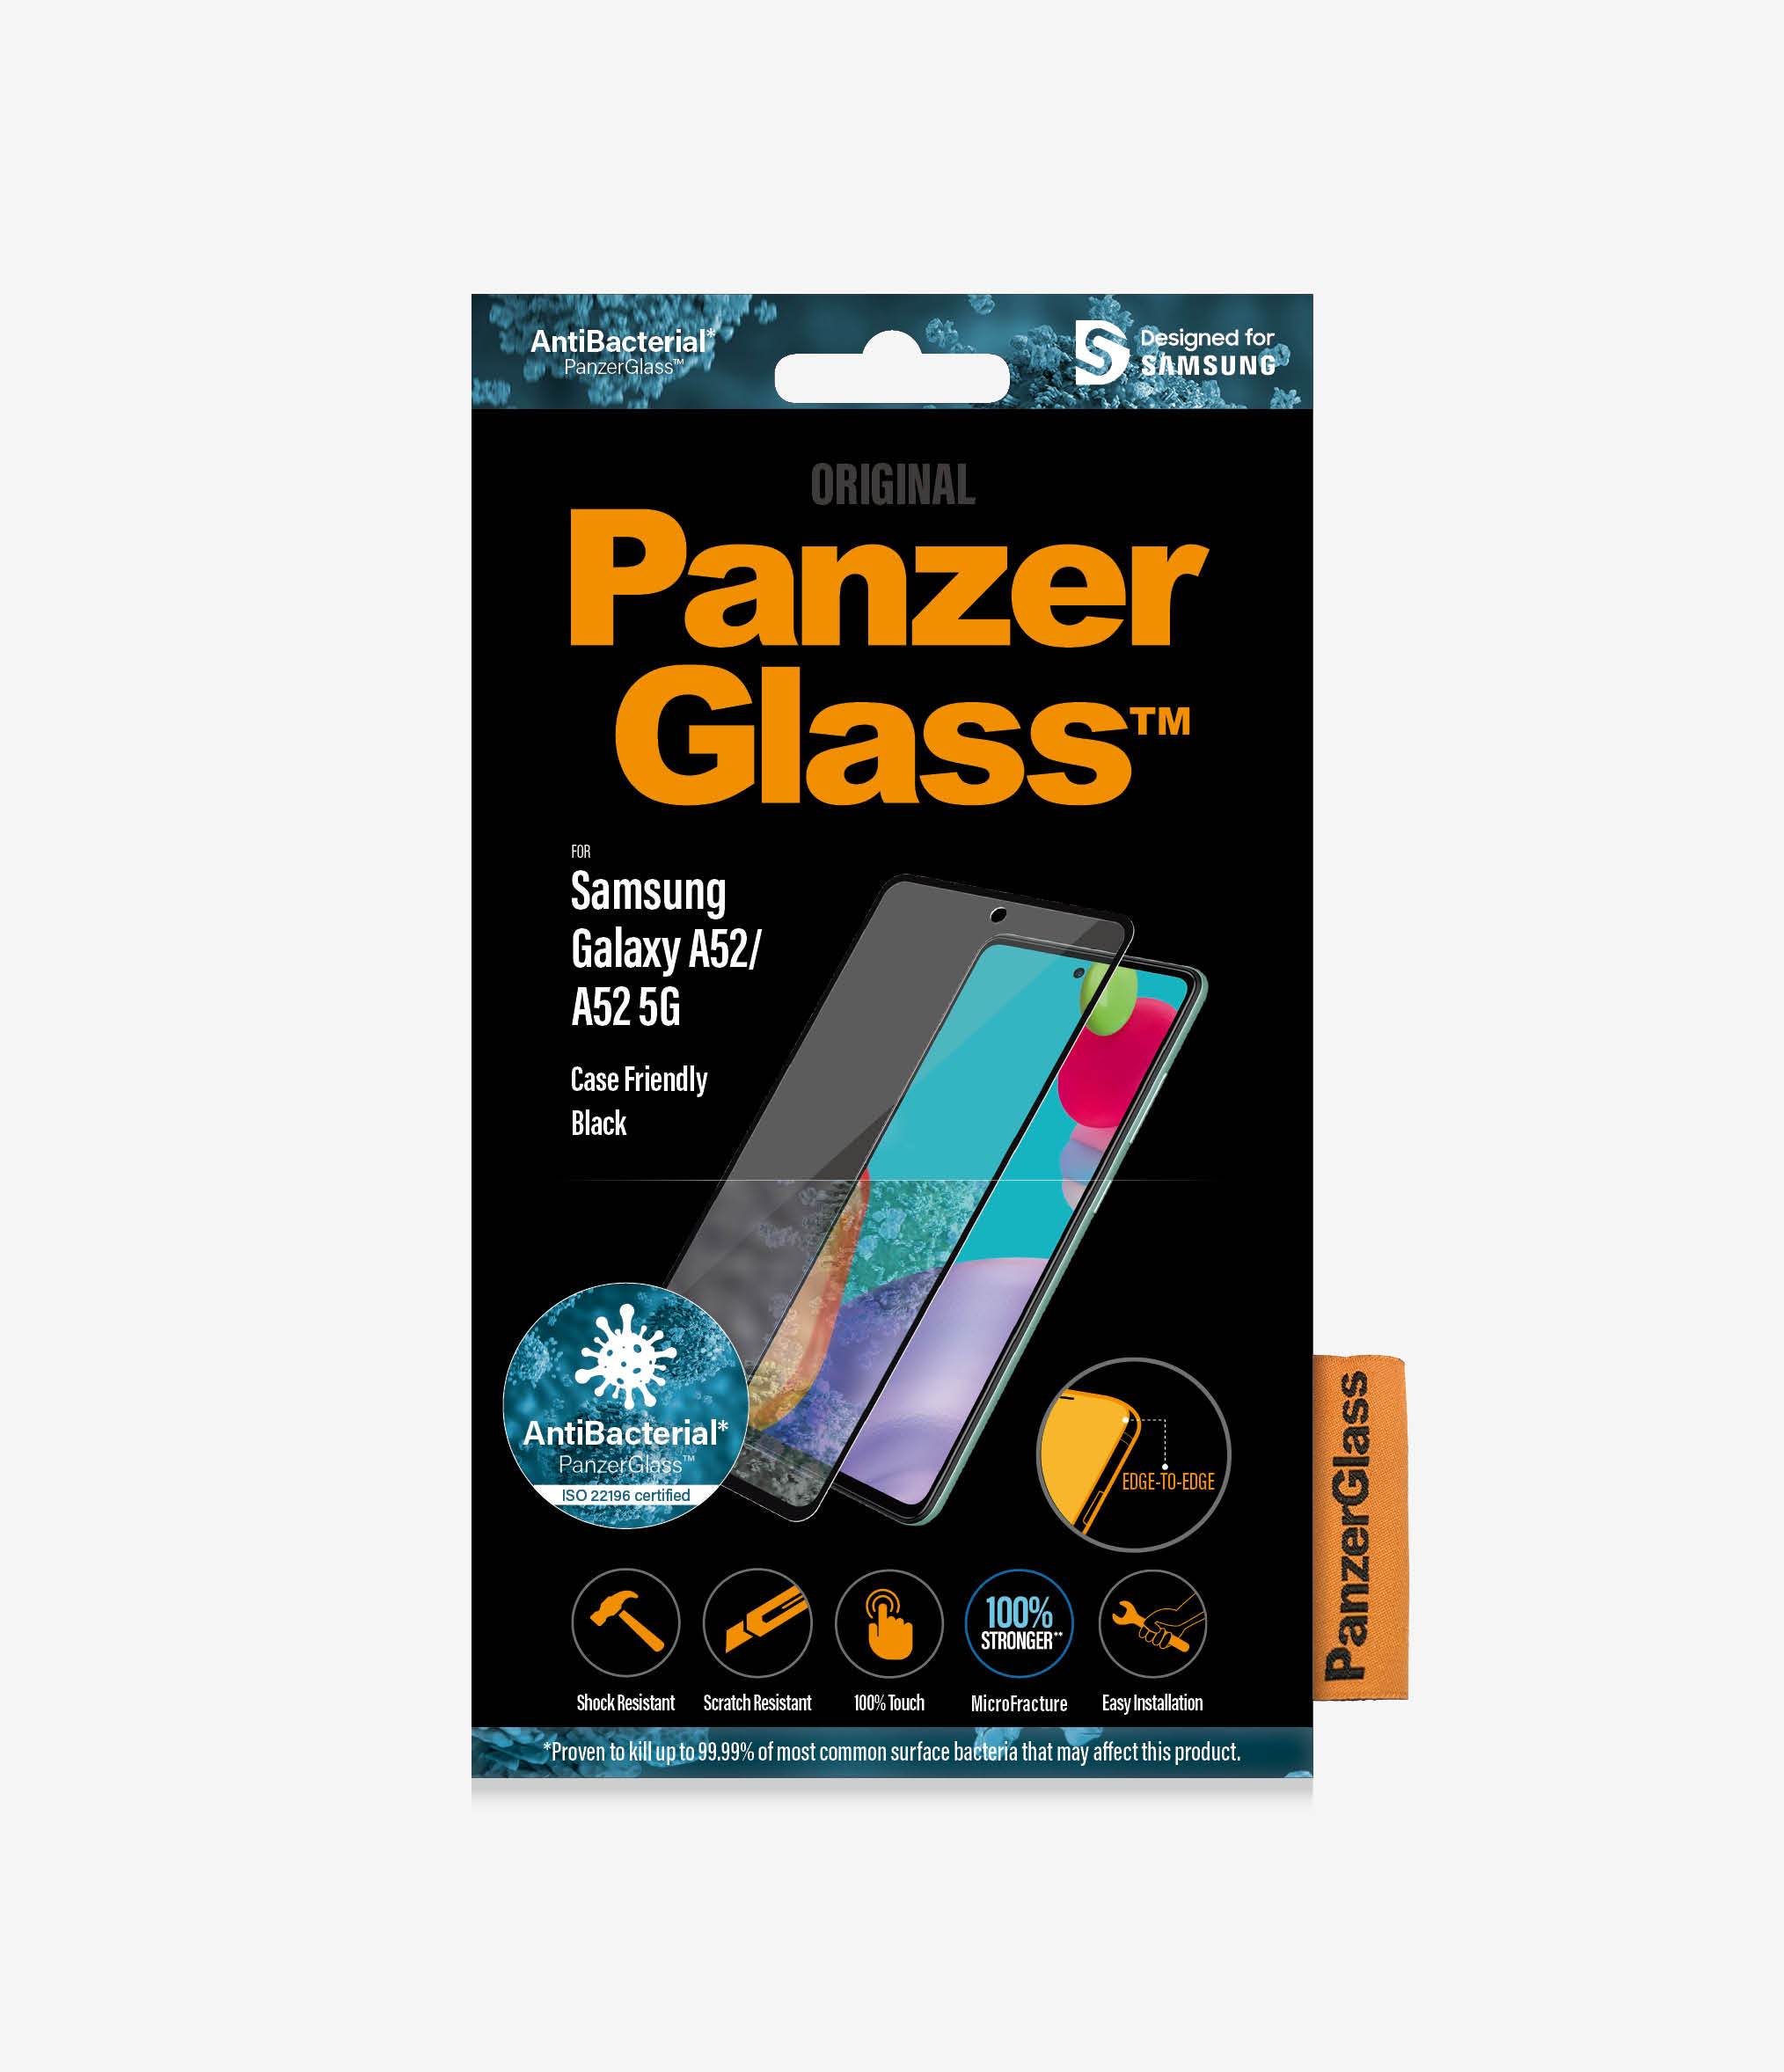 PanzerGlass™ Samsung Galaxy A52/A52 5G/ A52s 5G - Antibacterial (7253) - Screen Protector - Full frame coverage, Rounded edges, Crystal clear